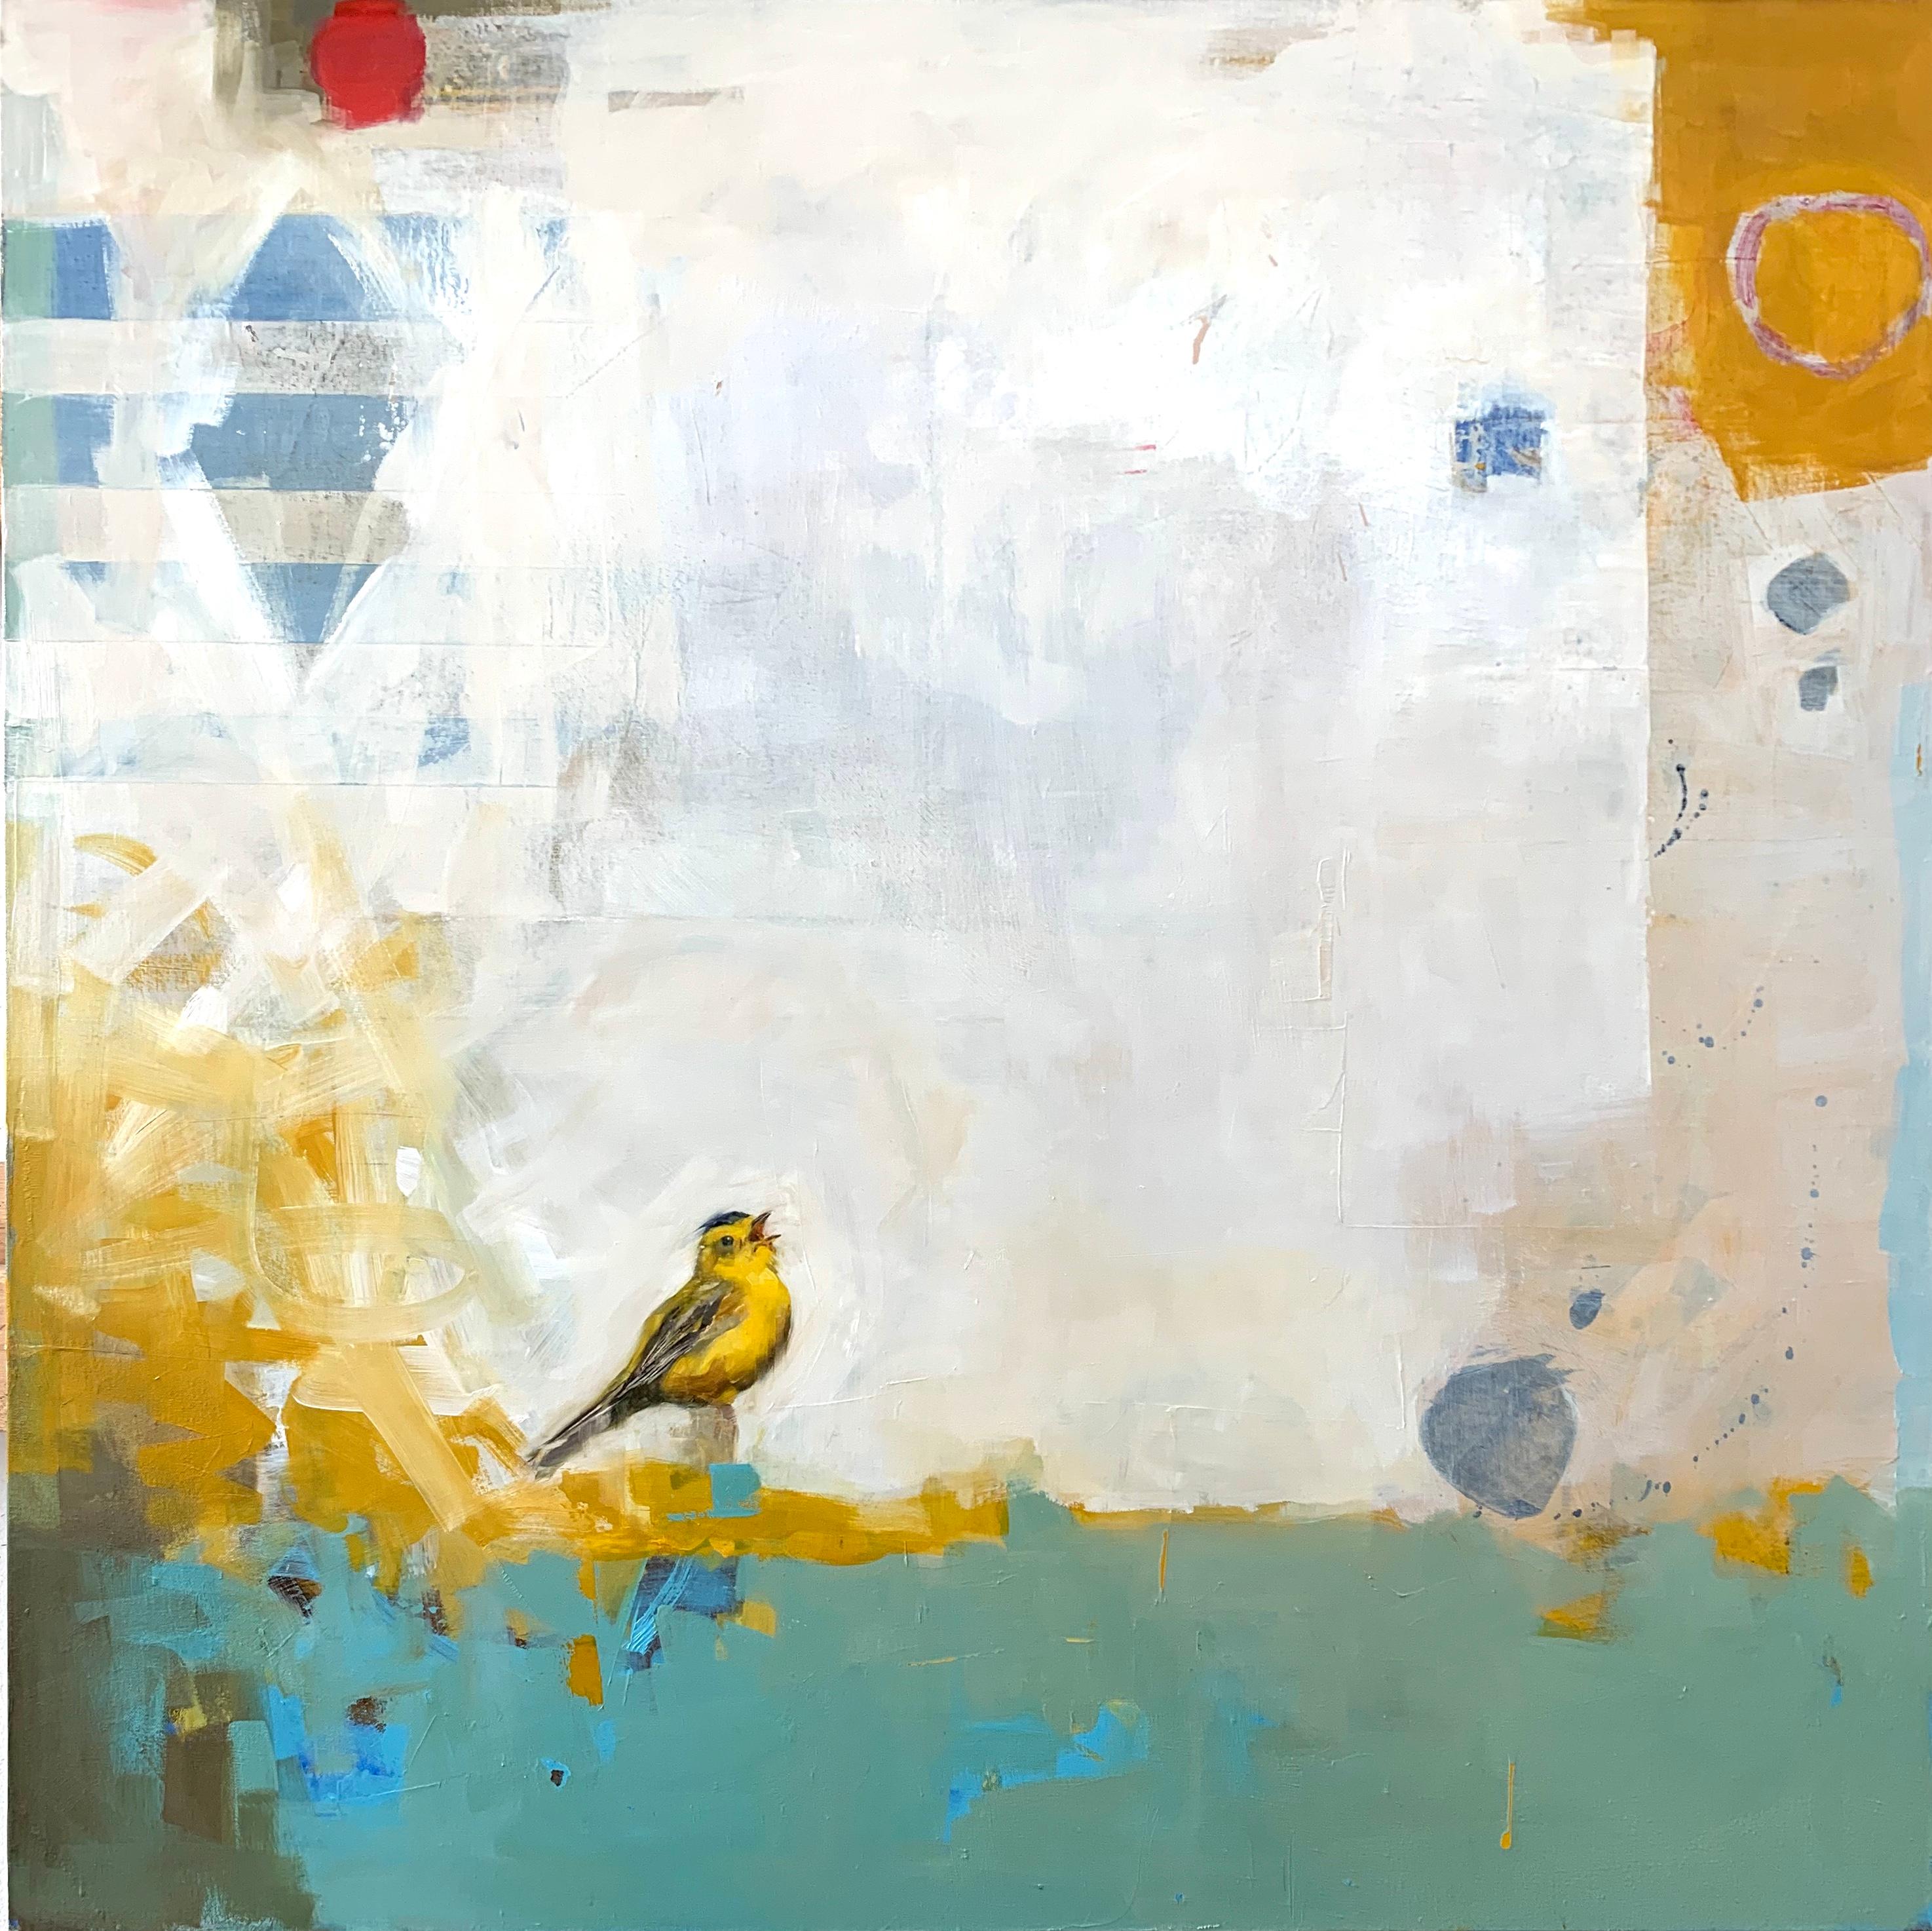 Song for Summer (Wilson’s Warbler) - oil on canvas